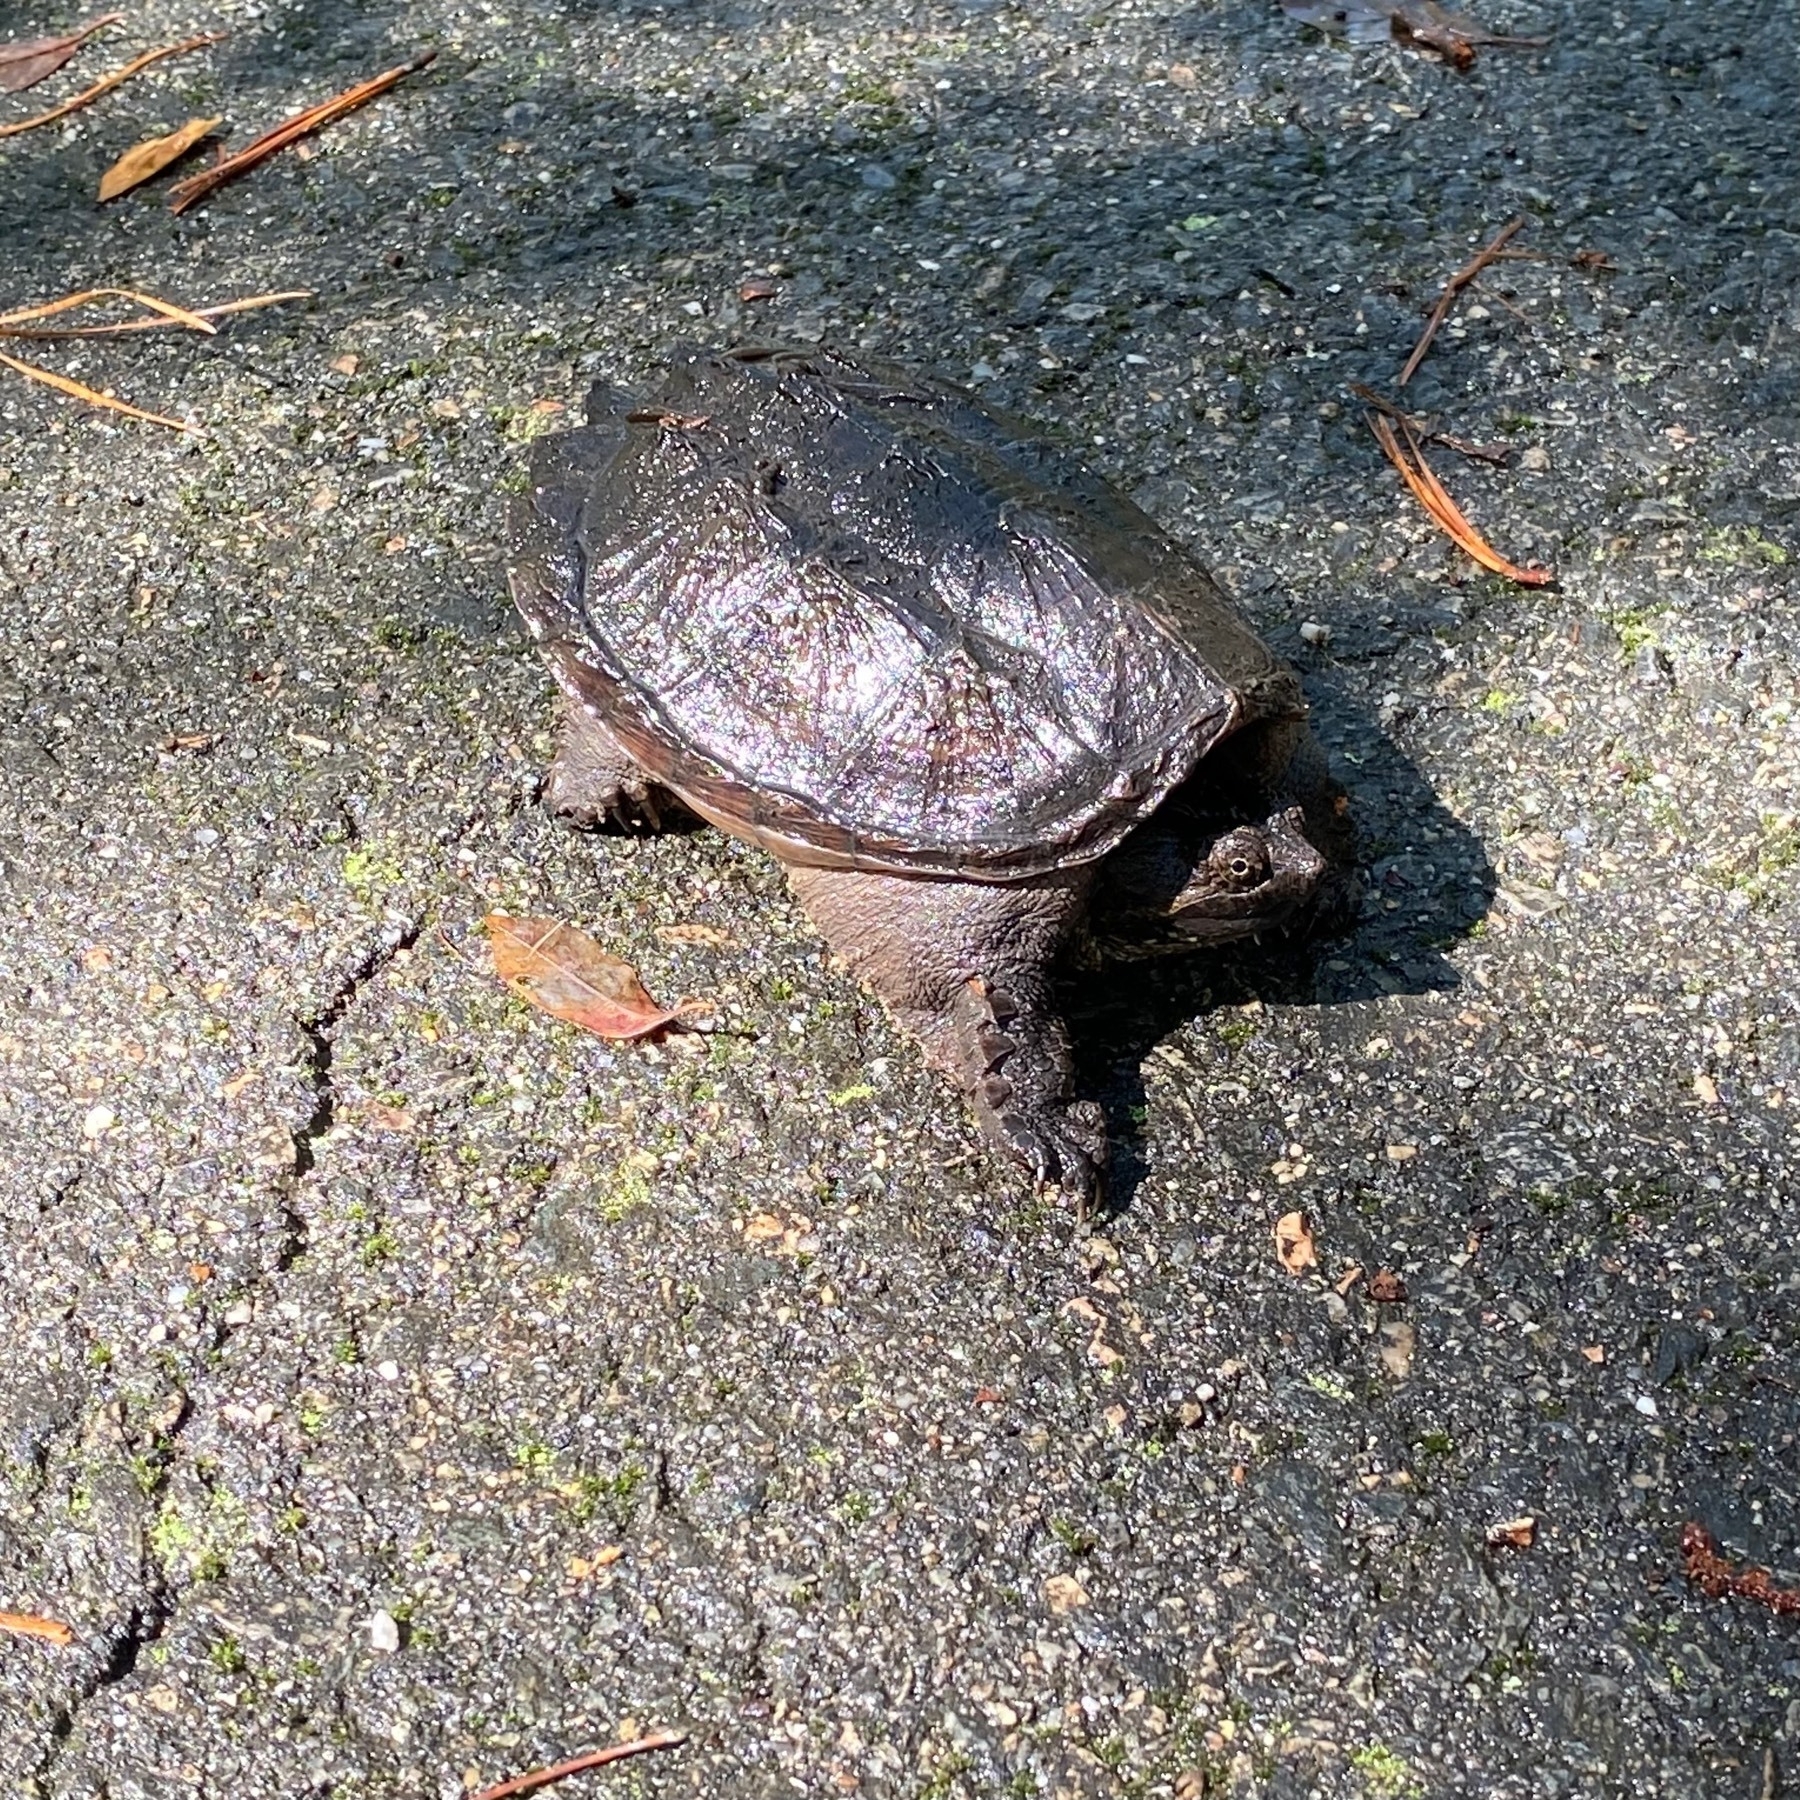 Very small snapping turtle on an asphalt path.